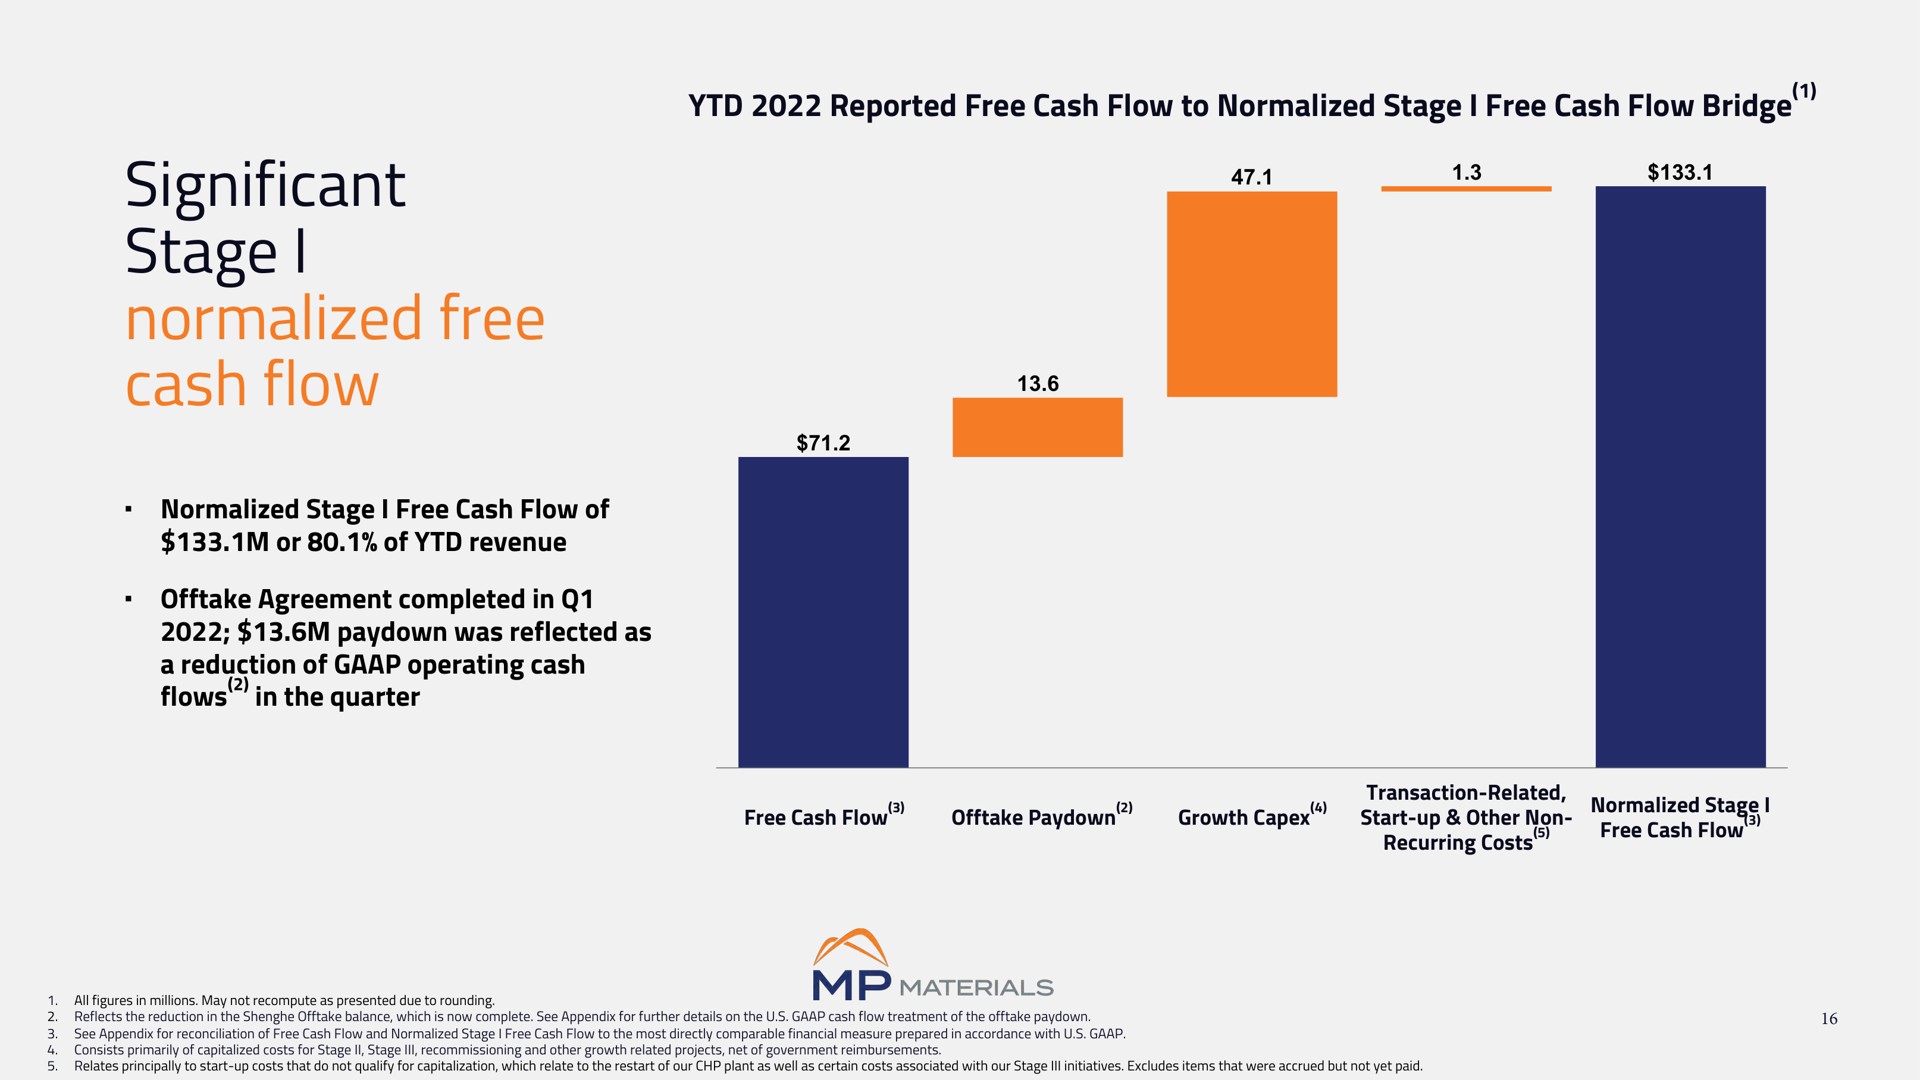 significant stage i normalized free cash flow | MP Materials